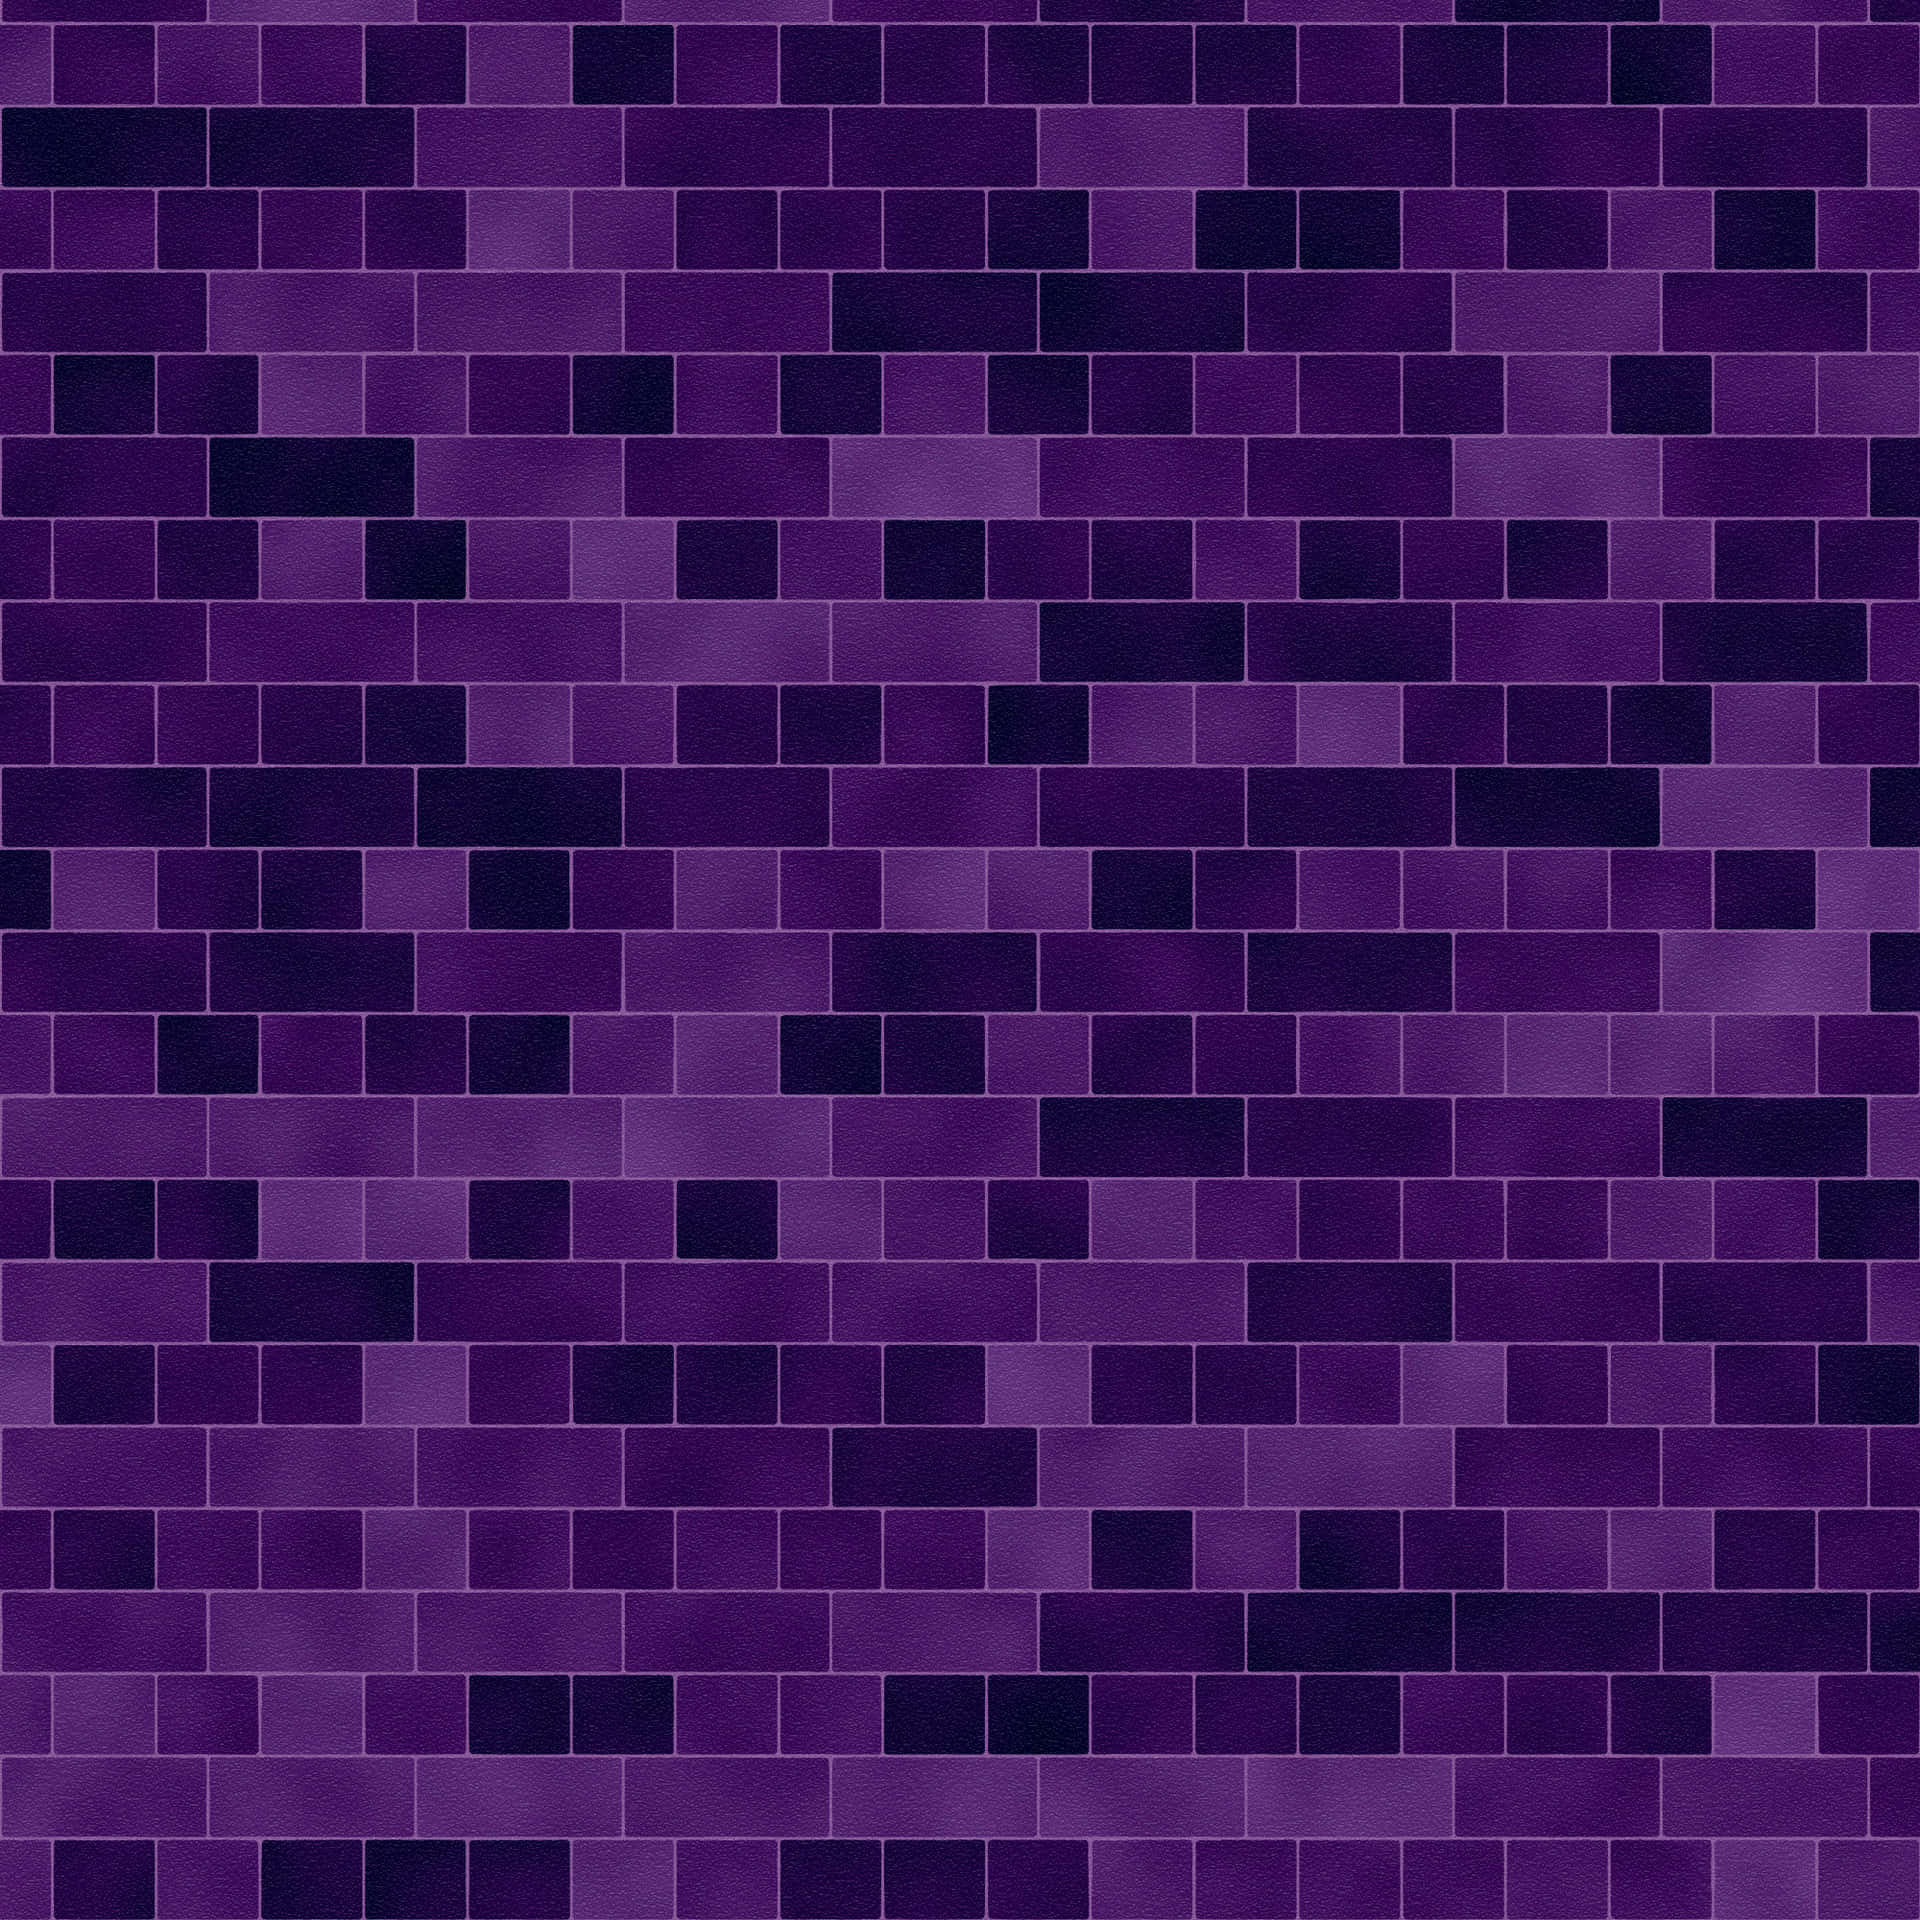 An interesting abstract pattern in vibrant purple and white Wallpaper